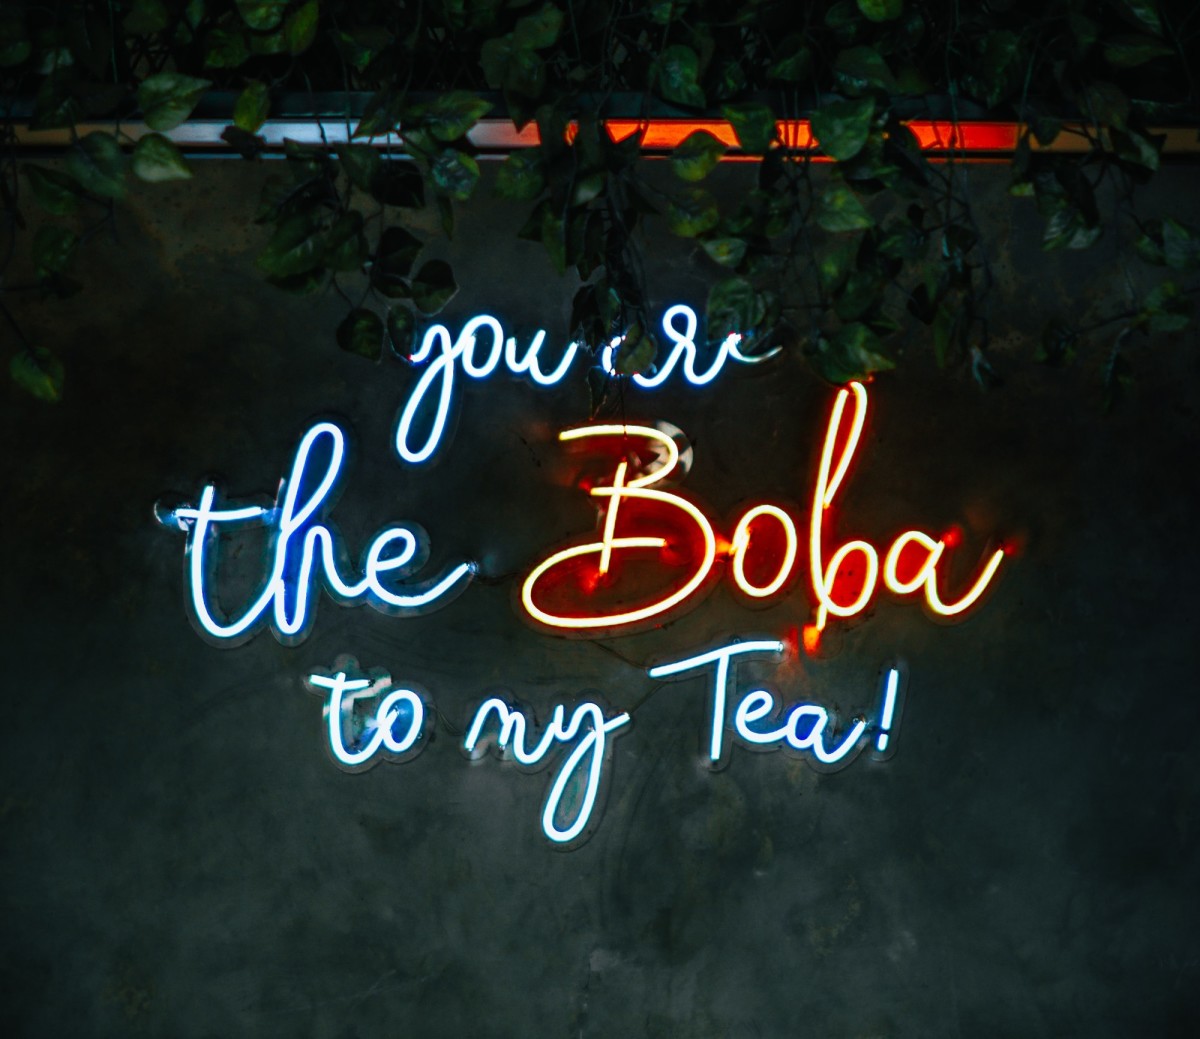 Boba Bliss - Cheers to the weekend! Try our different